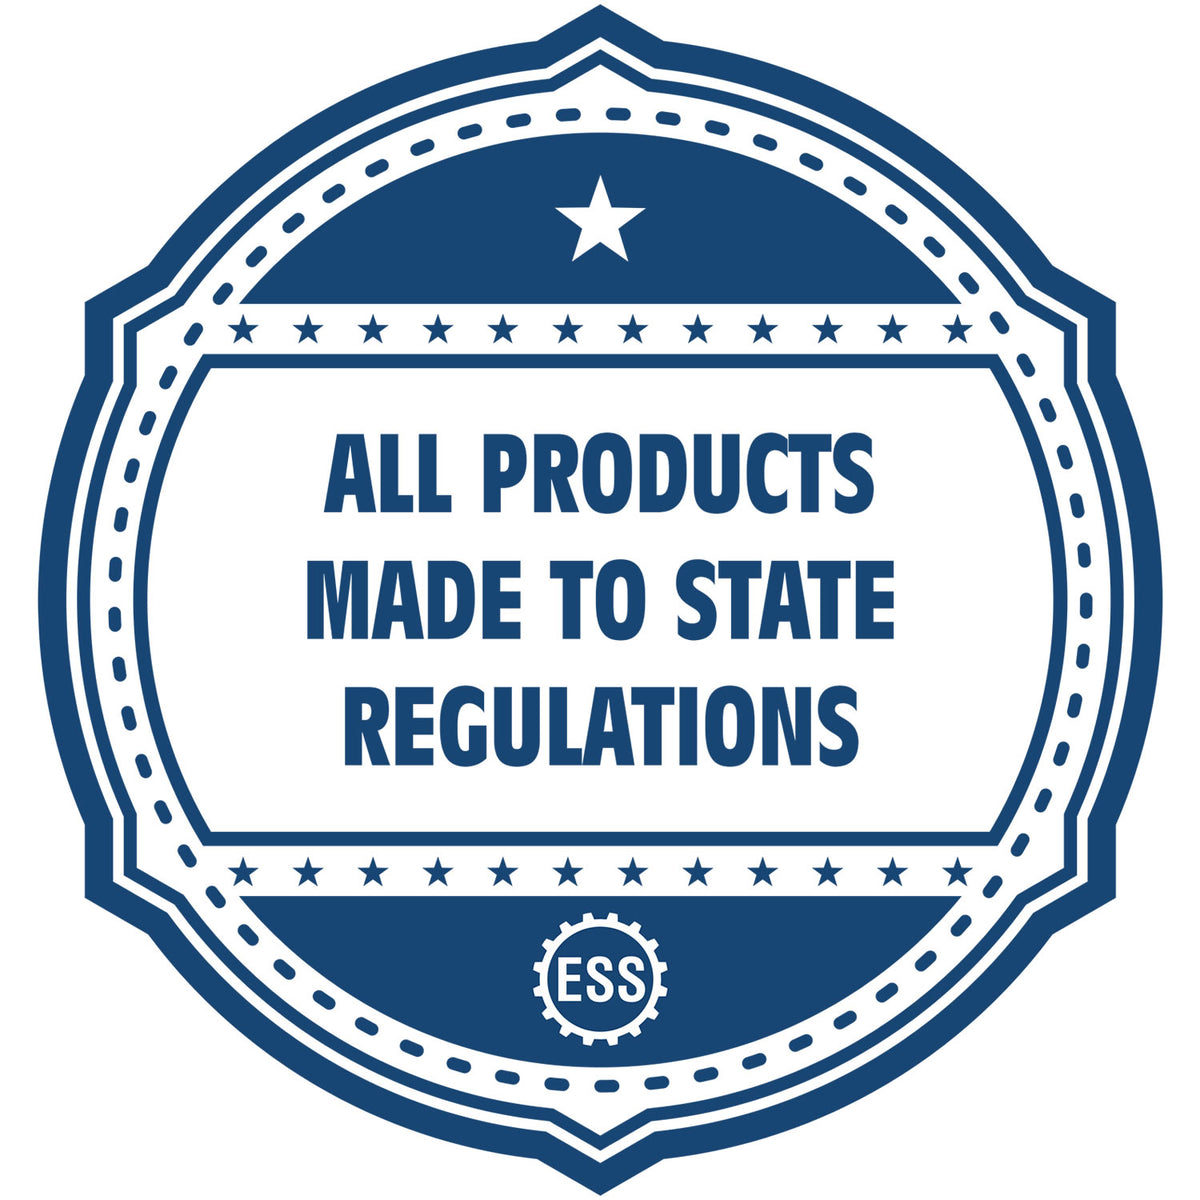 An icon or badge element for the Handheld Guam Architect Seal Embosser showing that this product is made in compliance with state regulations.